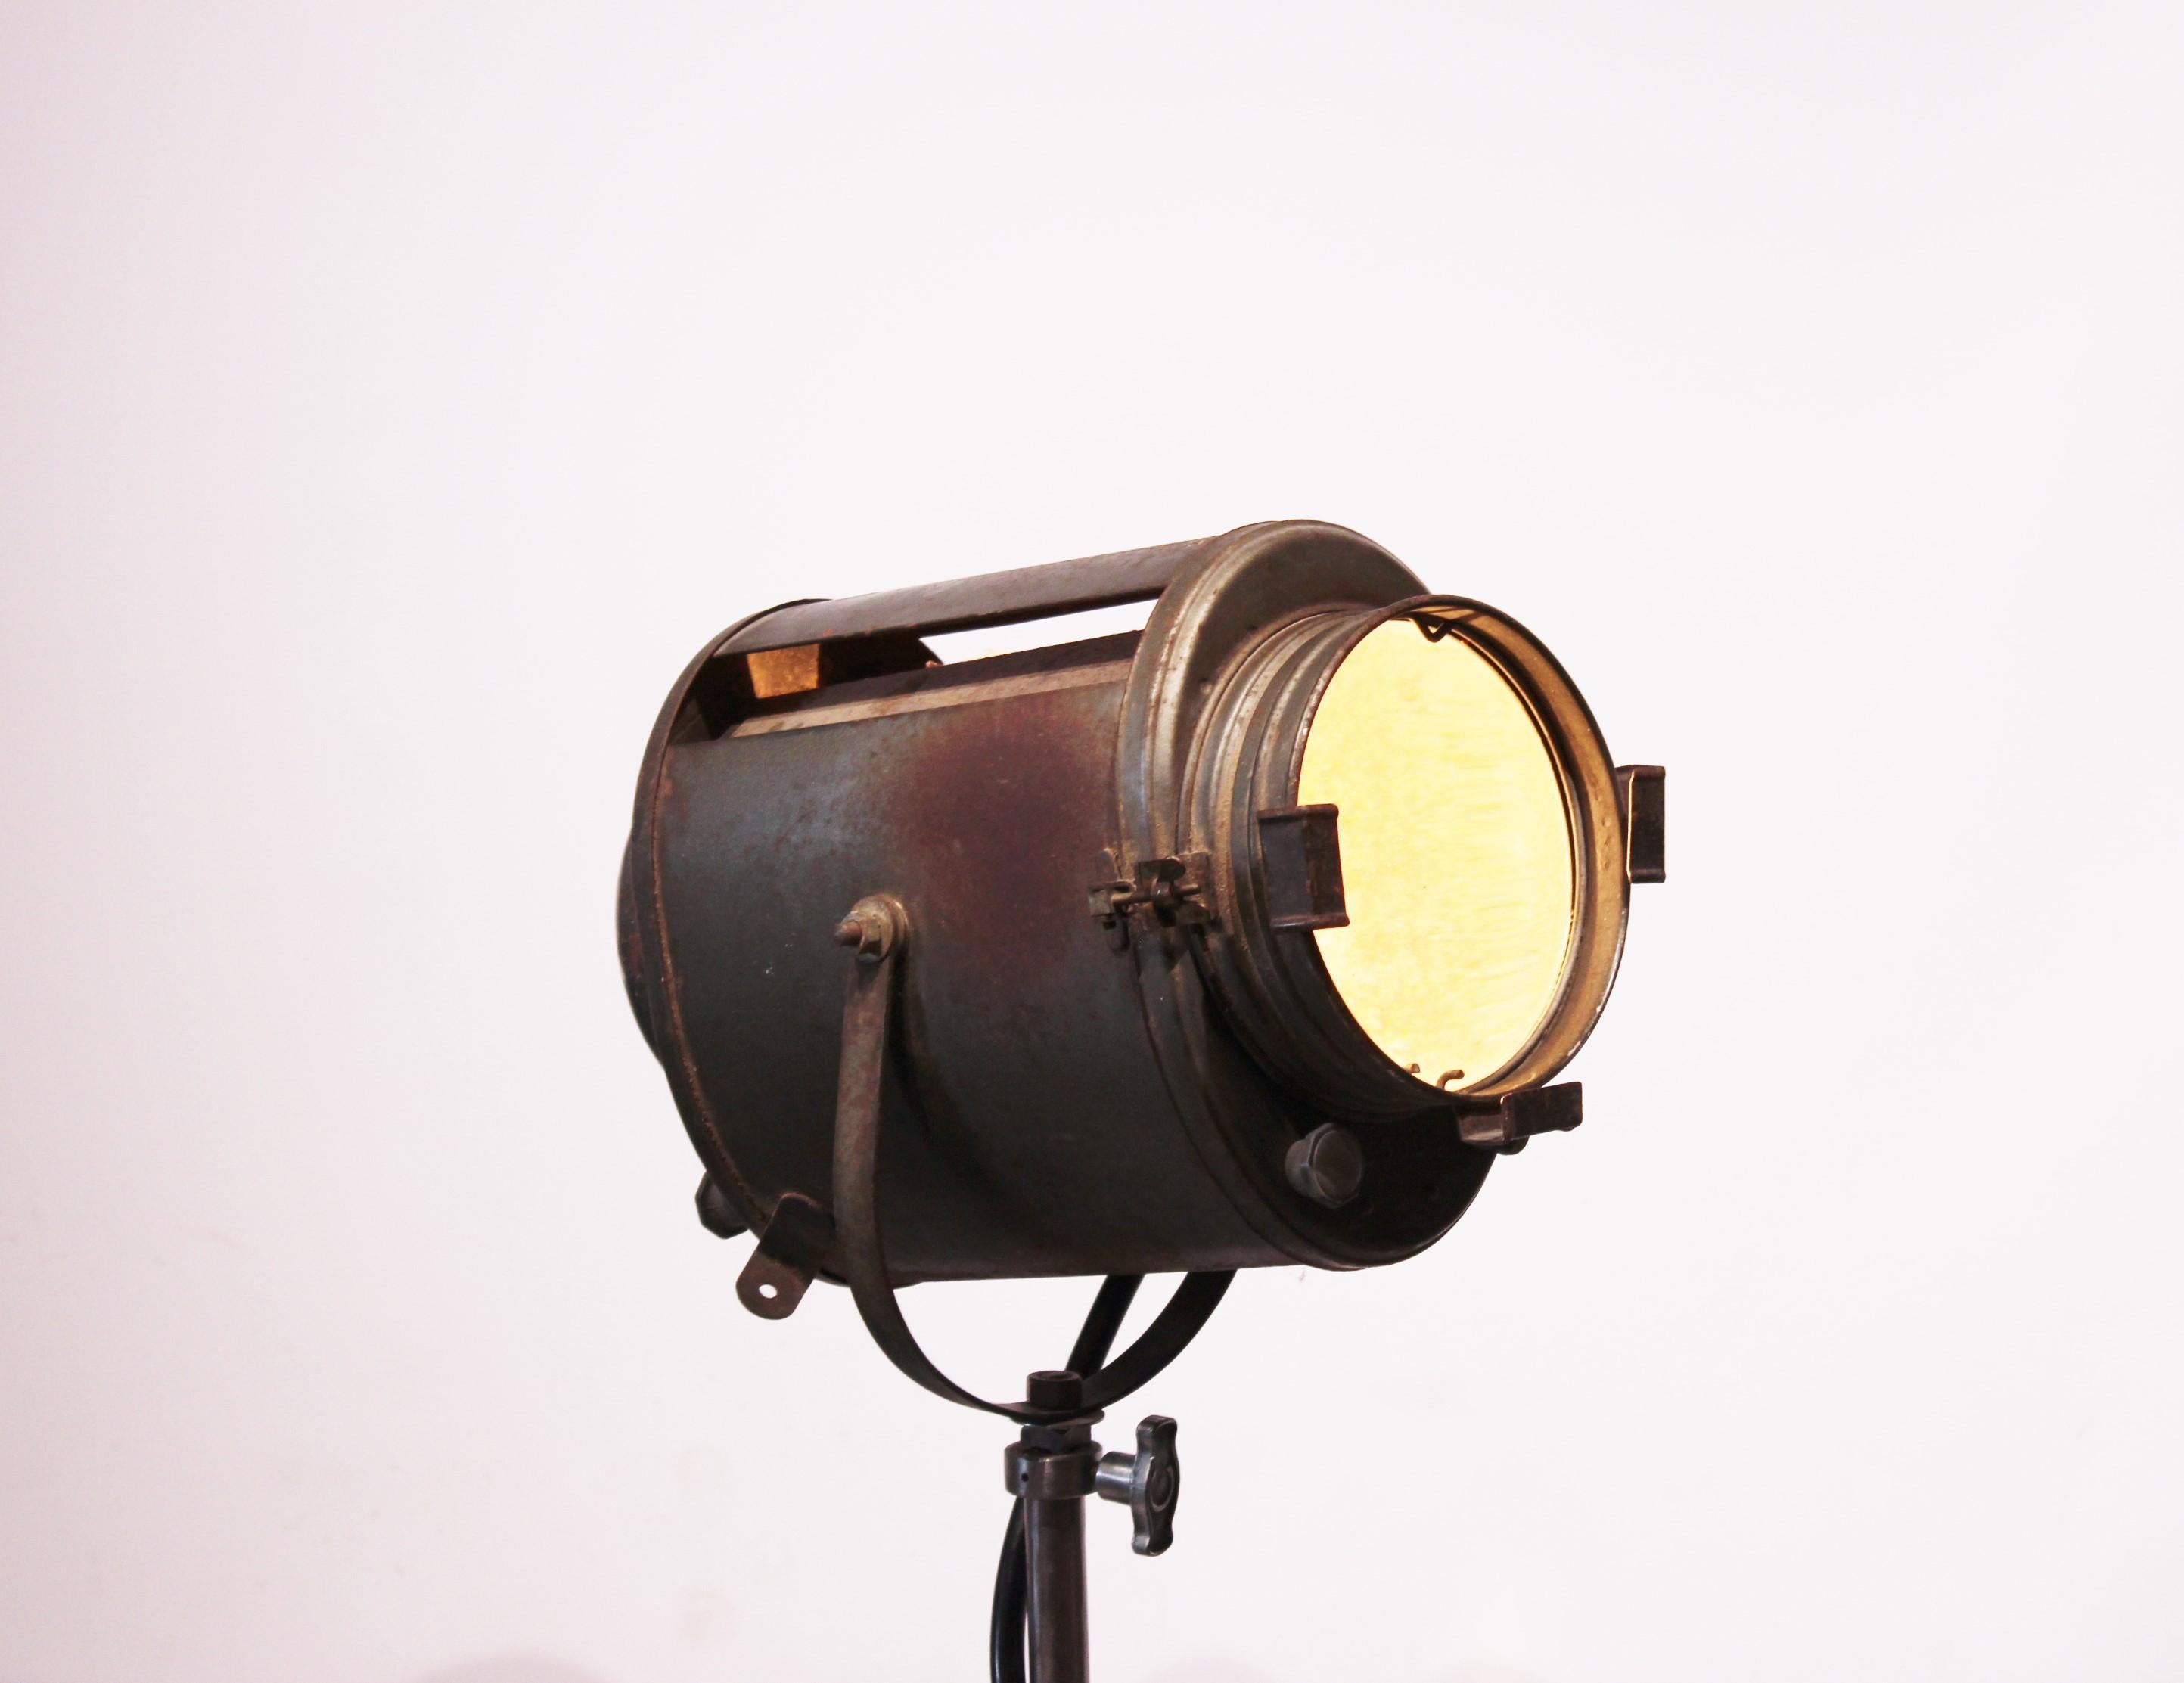 Industrial Vintage Original Projector by A.E. Cremer Paris from the 1950s